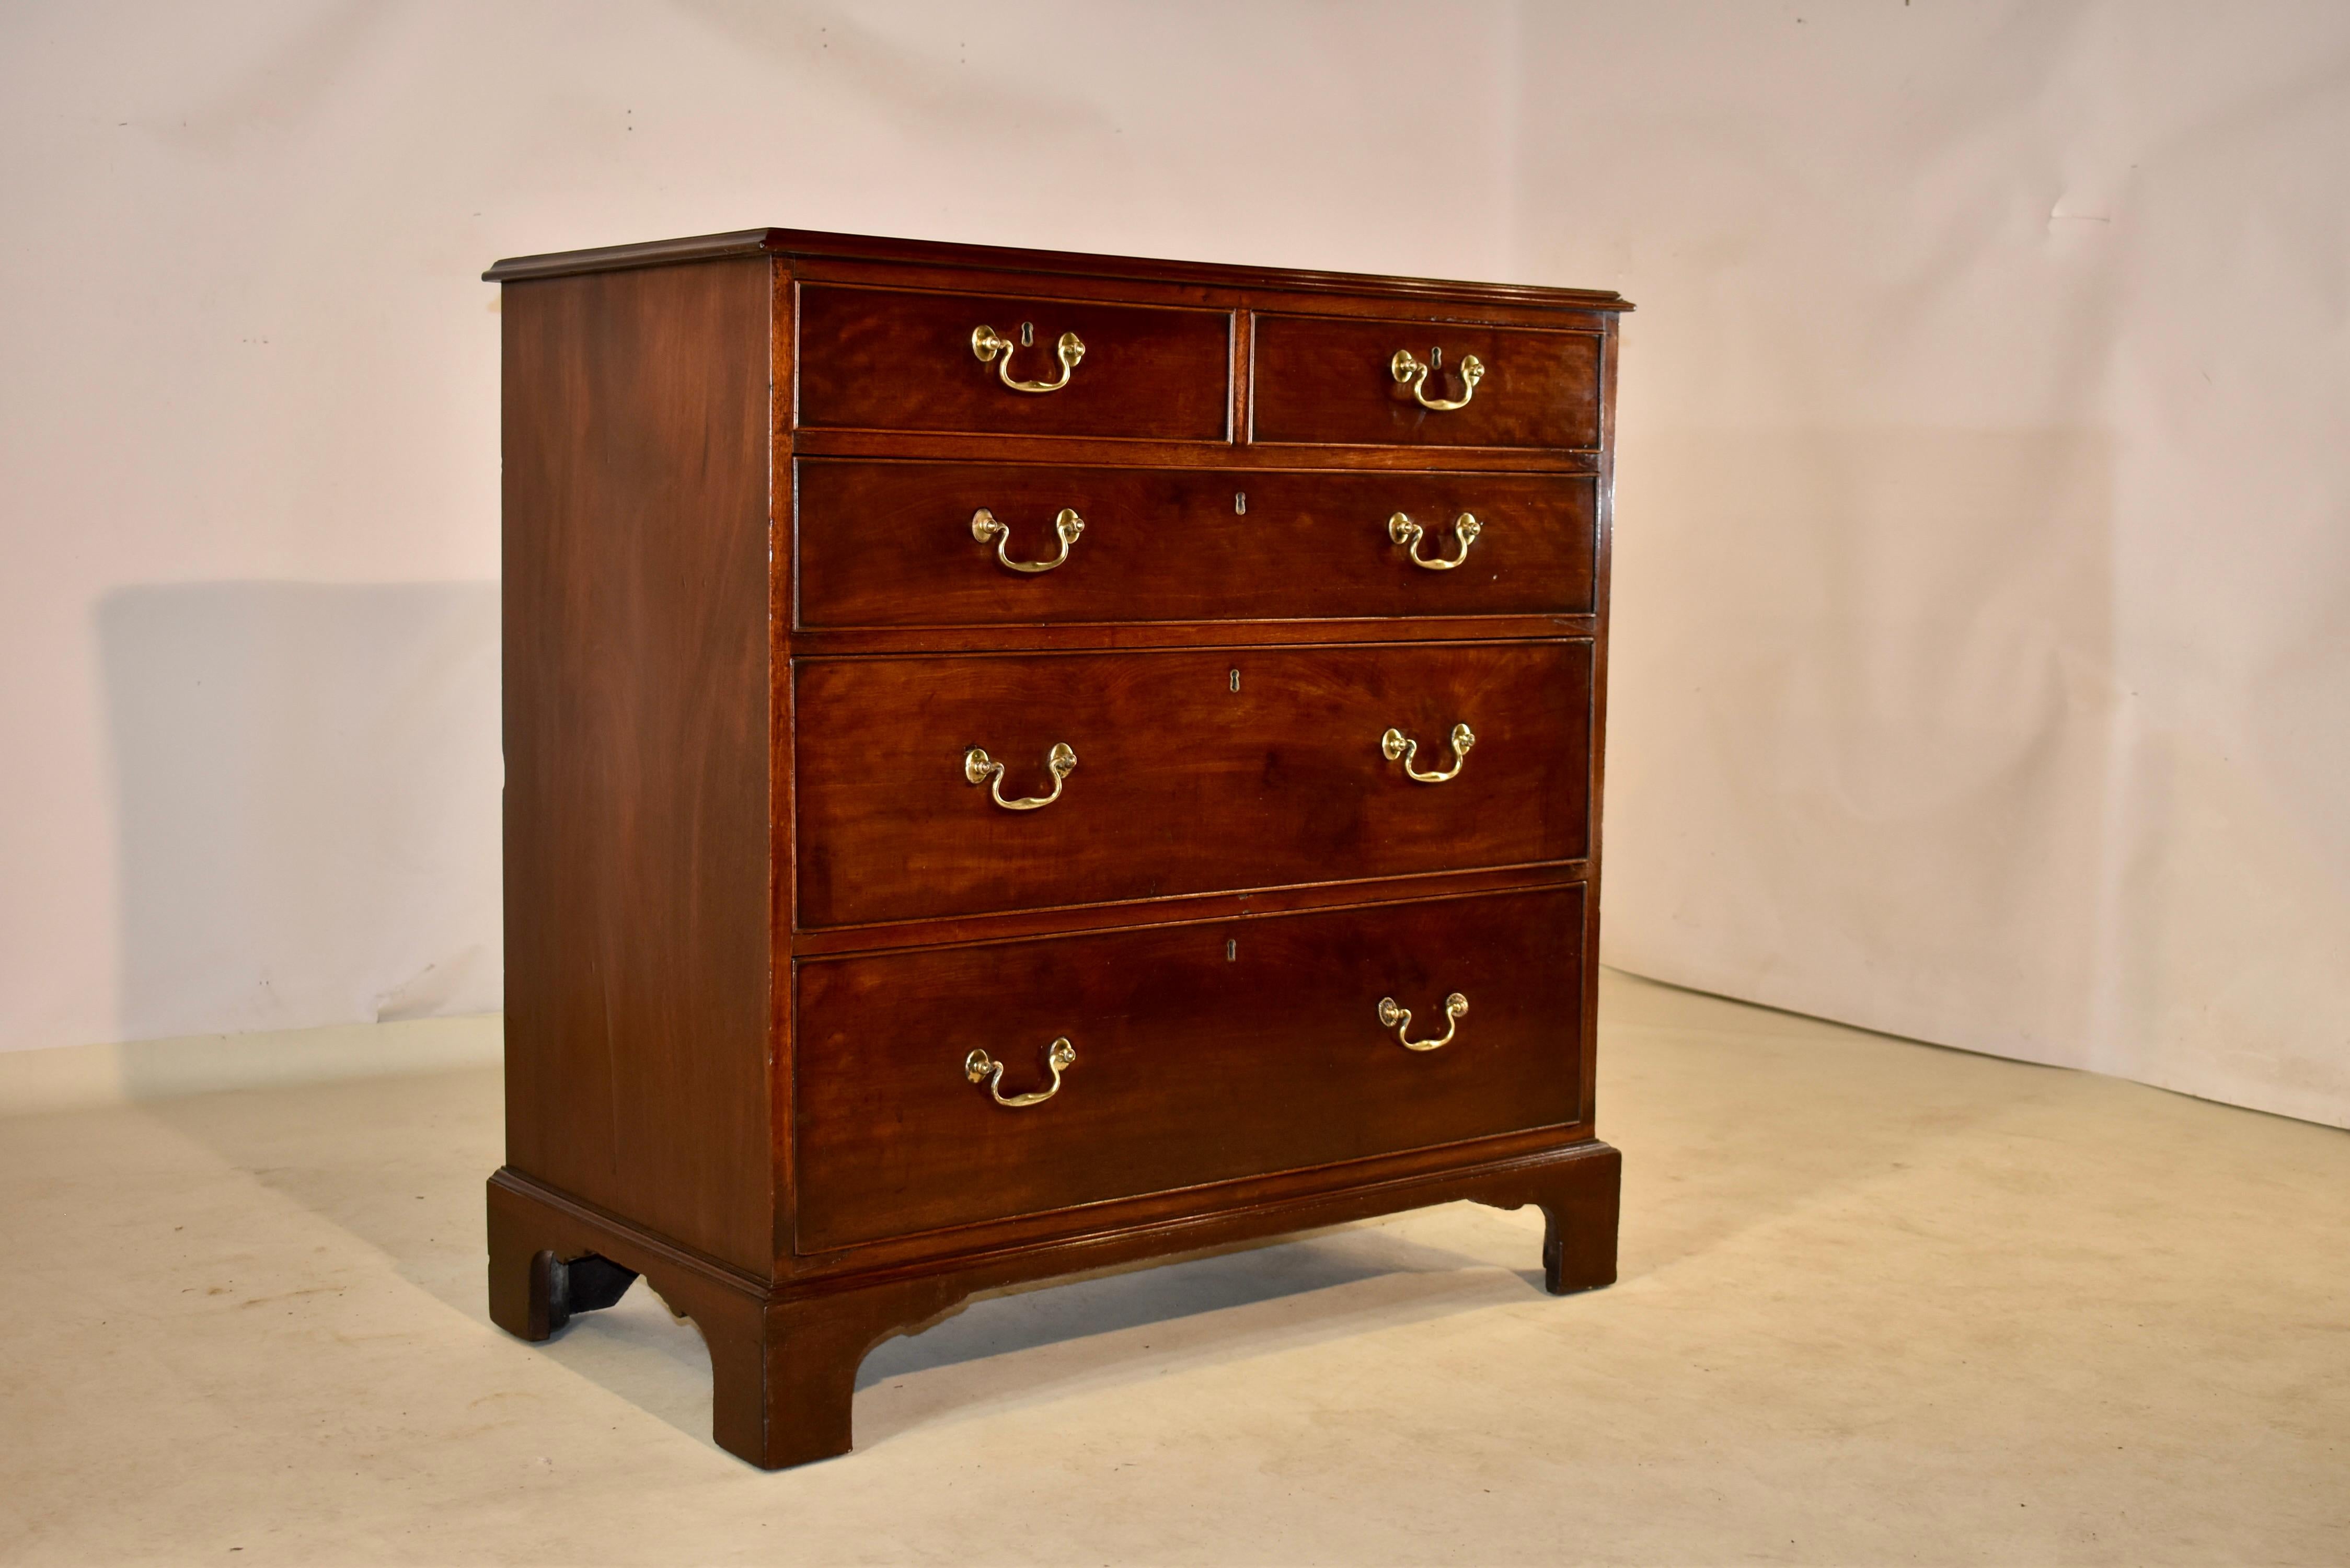 19th Century English Mahogany Chest of Drawers In Good Condition For Sale In High Point, NC